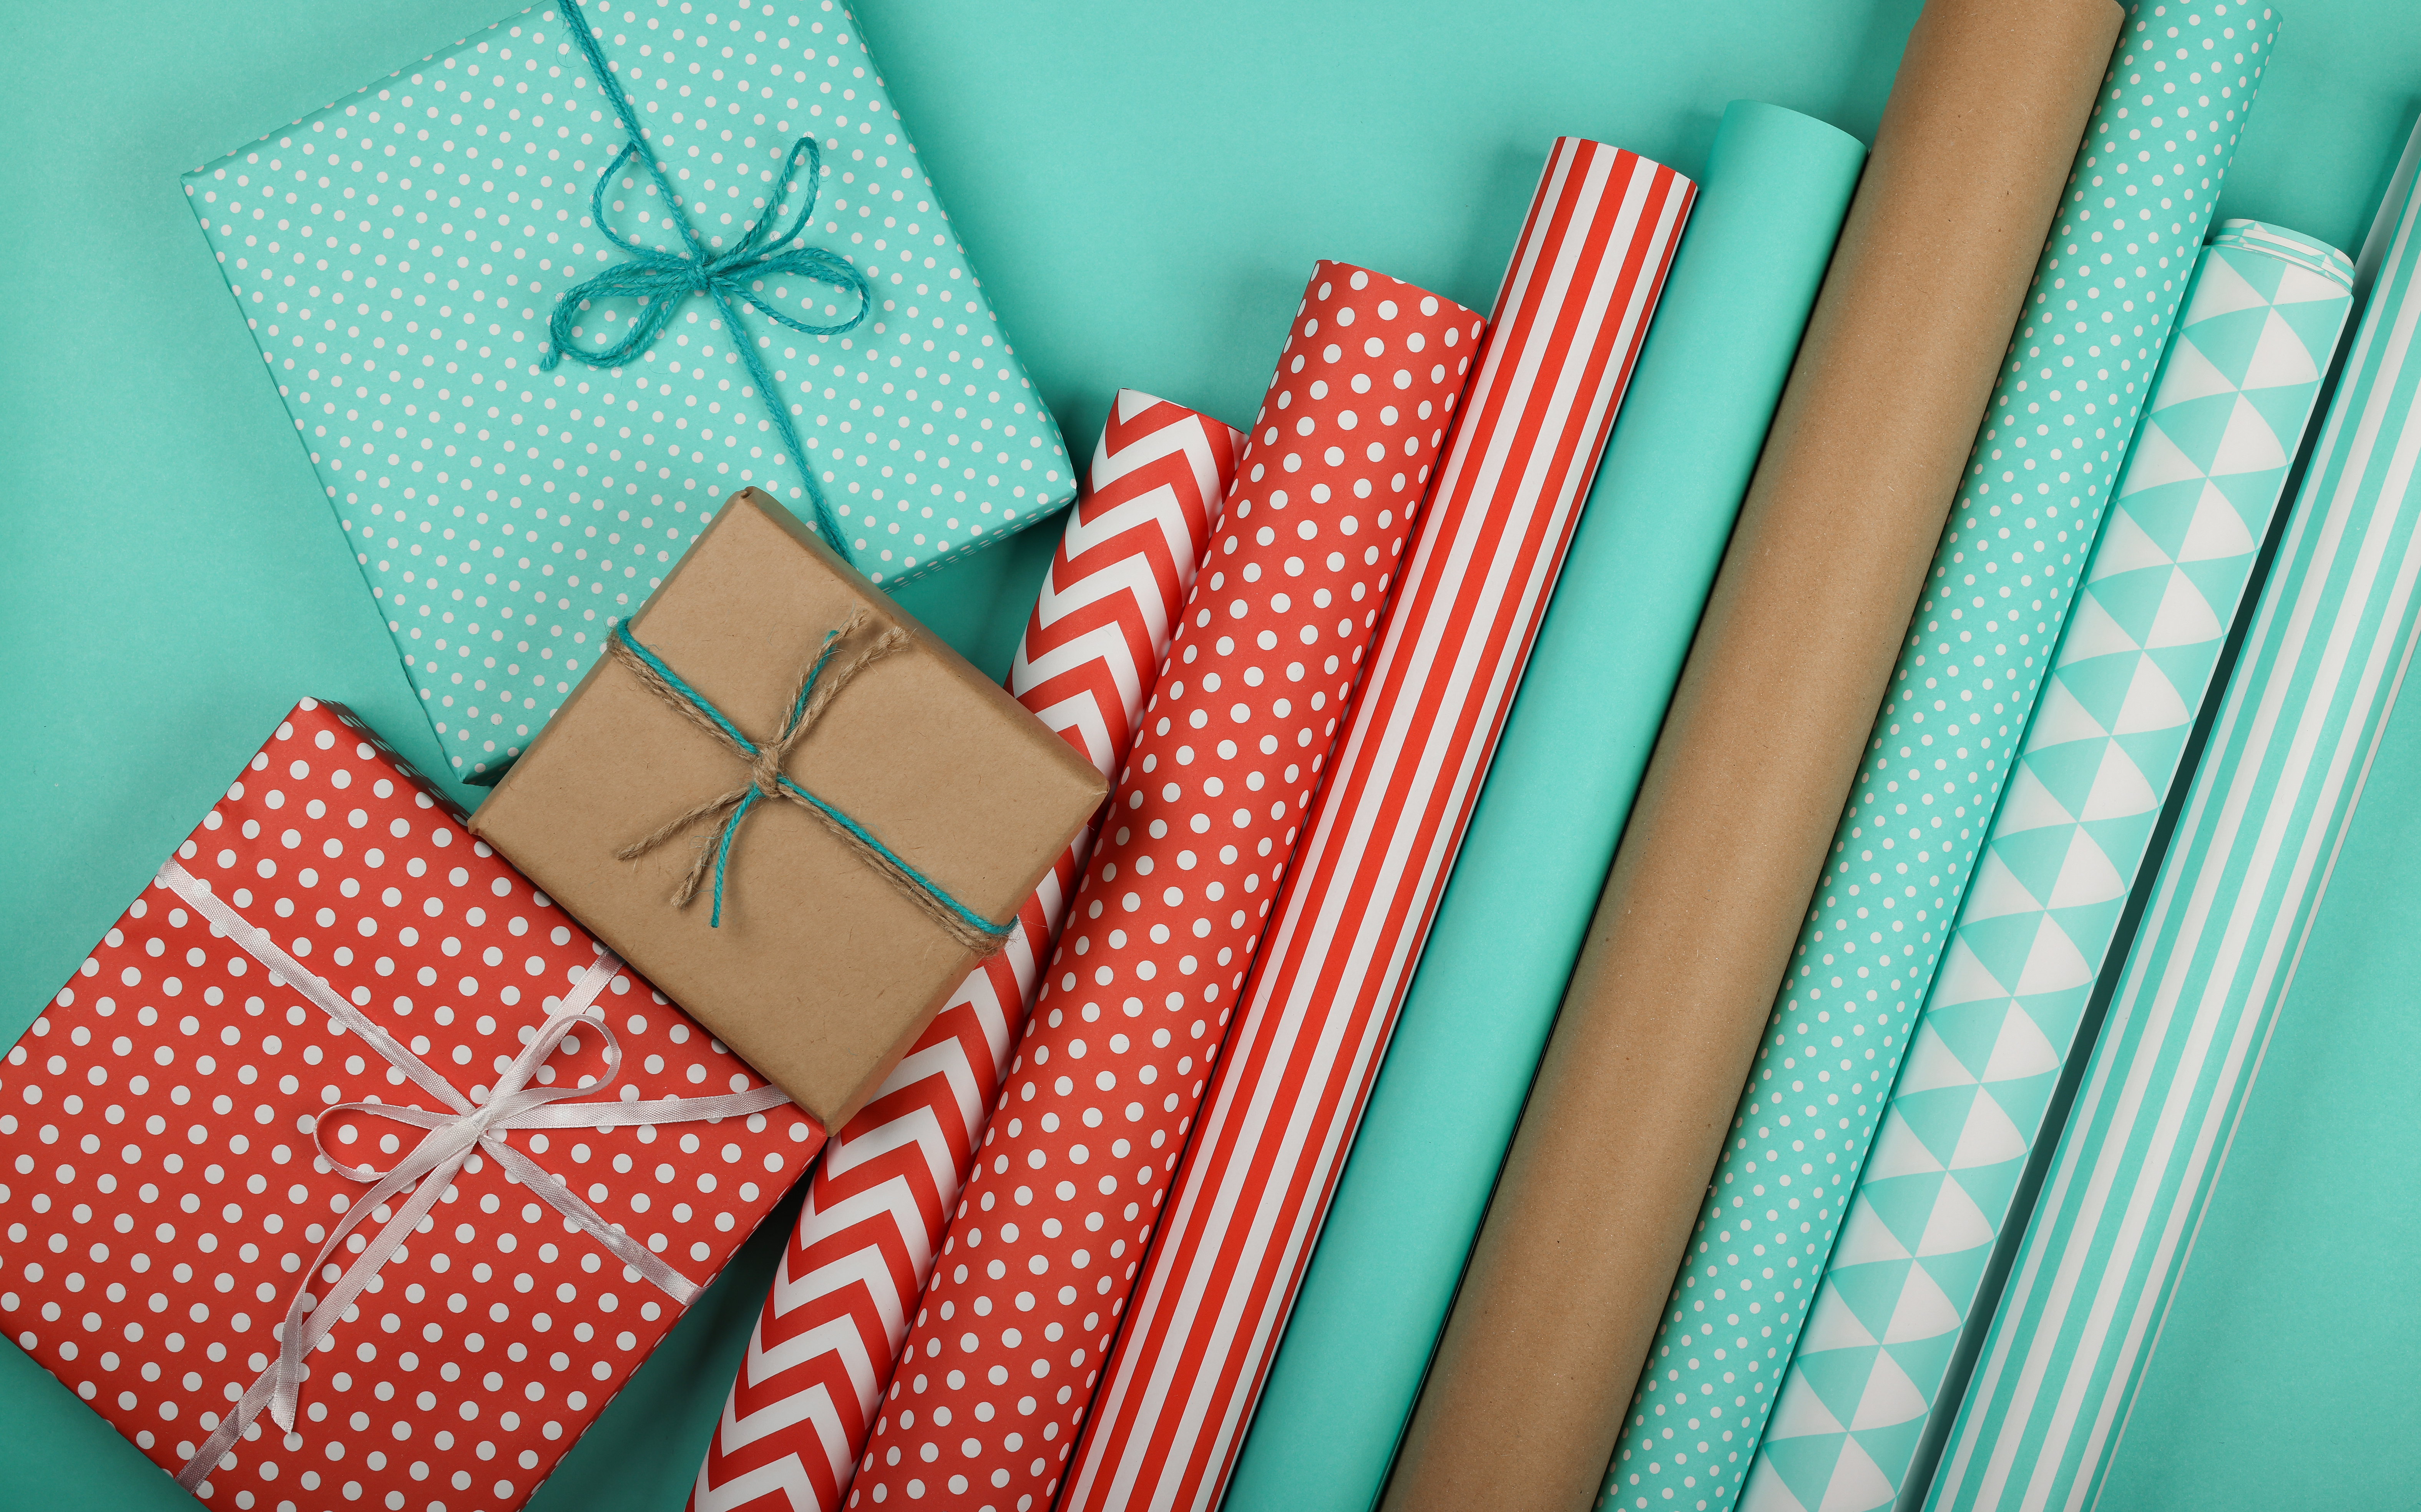 Gift wrap rolls and wrapped packages against a pale blue background